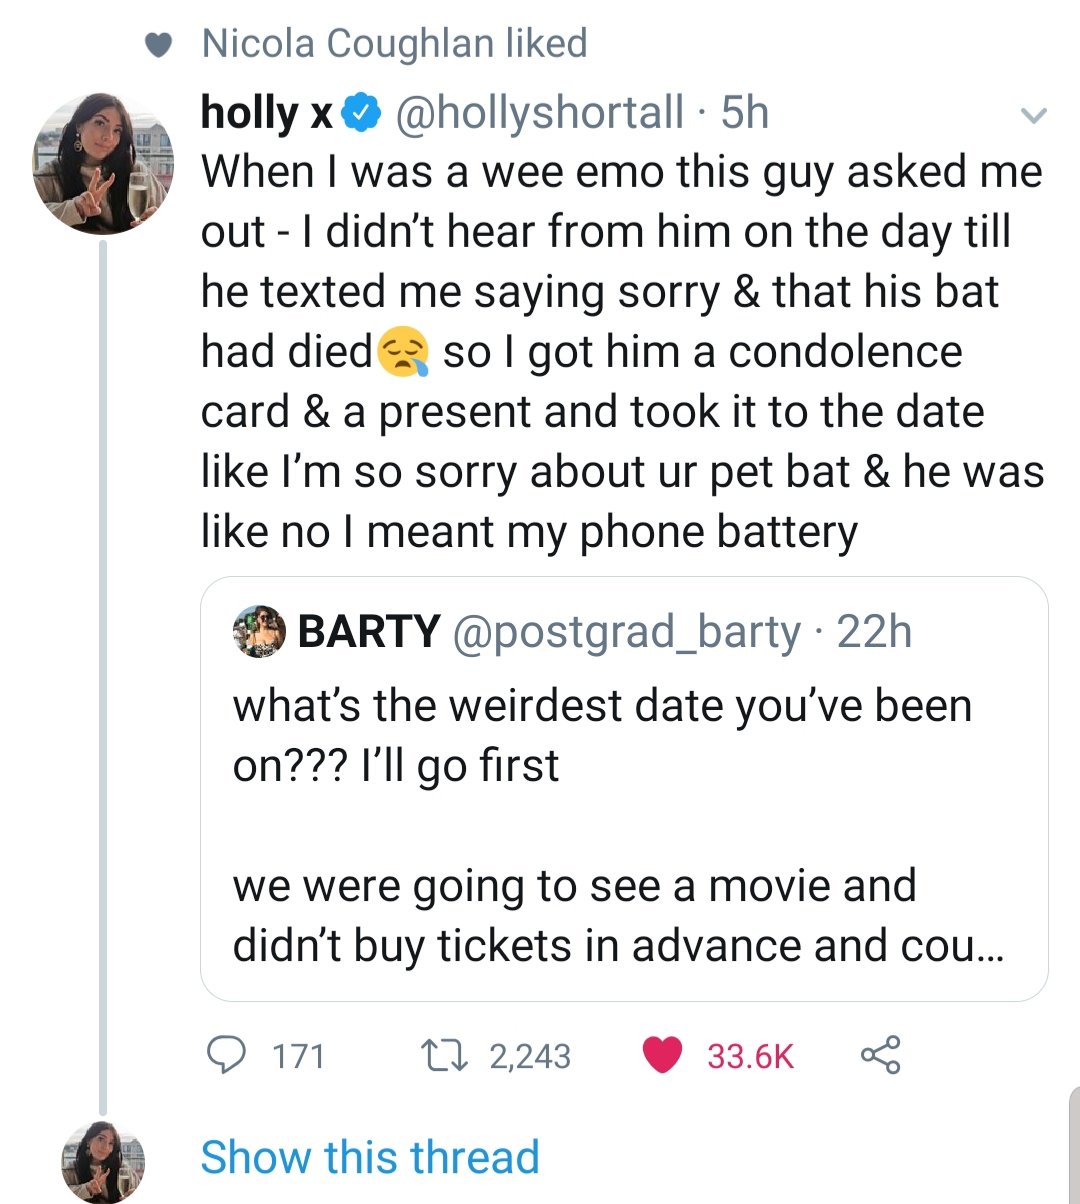 document - Nicola Coughlan d holly x 5h When I was a wee emo this guy asked me out I didn't hear from him on the day till he texted me saying sorry & that his bat had died so I got him a condolence card & a present and took it to the date I'm so sorry abo